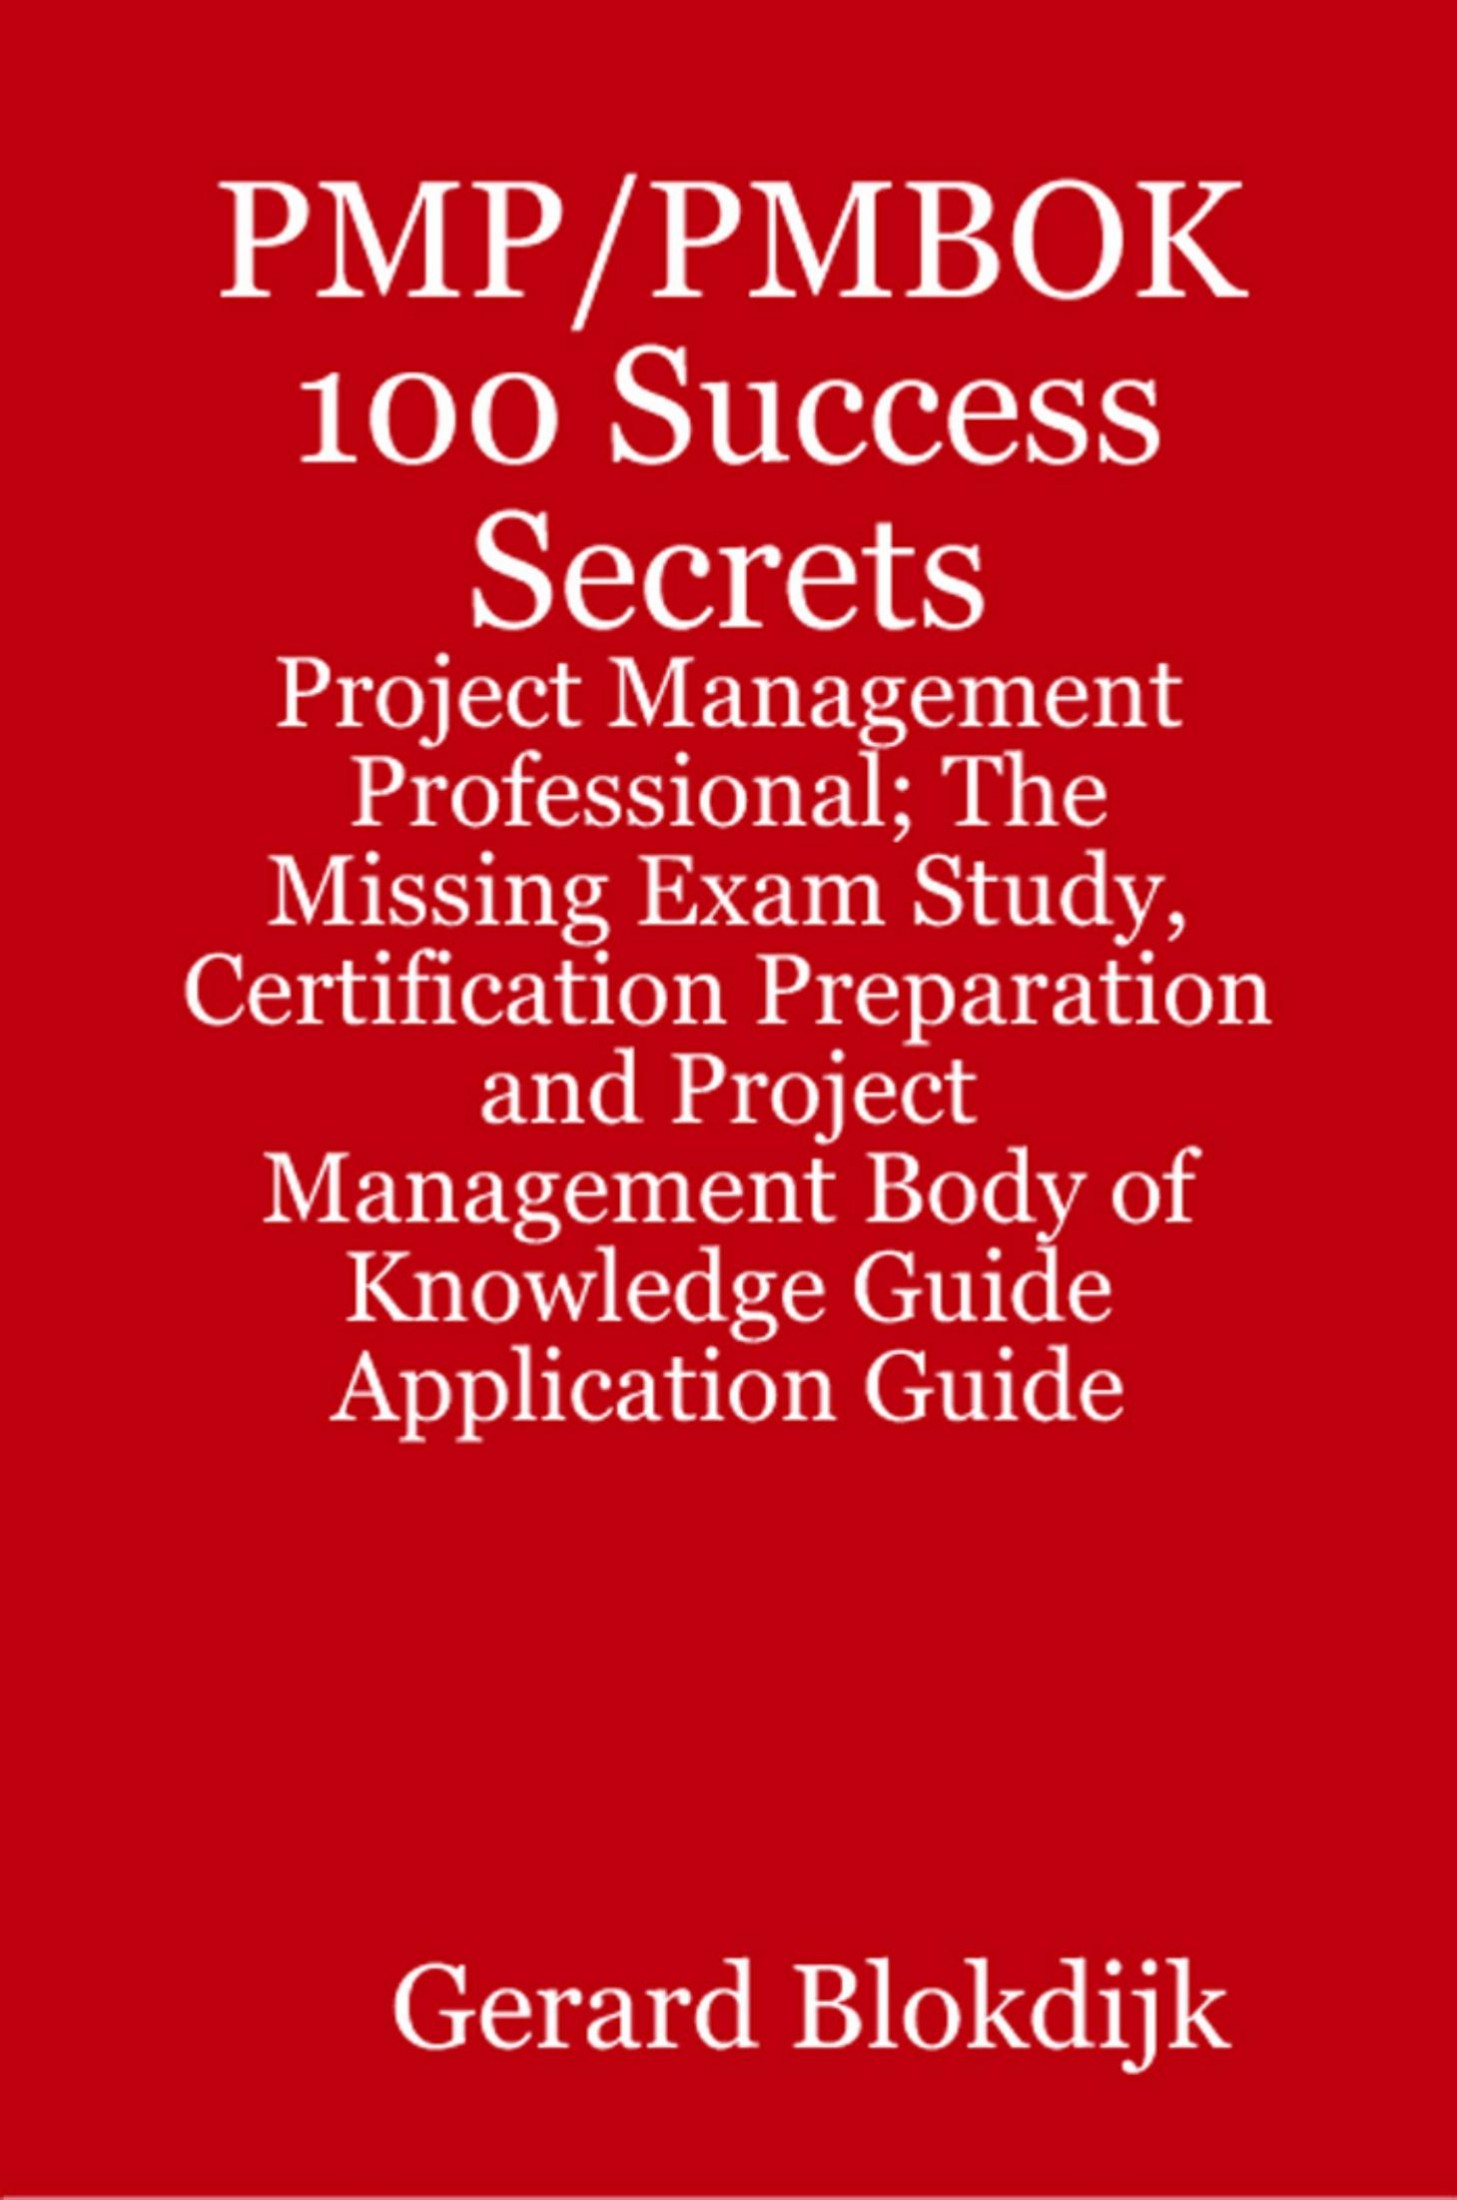 PMP®/PMBOK® 100 Success Secrets: Project Management Professional; The Missing Exam Study, Certification Preparation and Project Management Body of Knowledge Application Guide